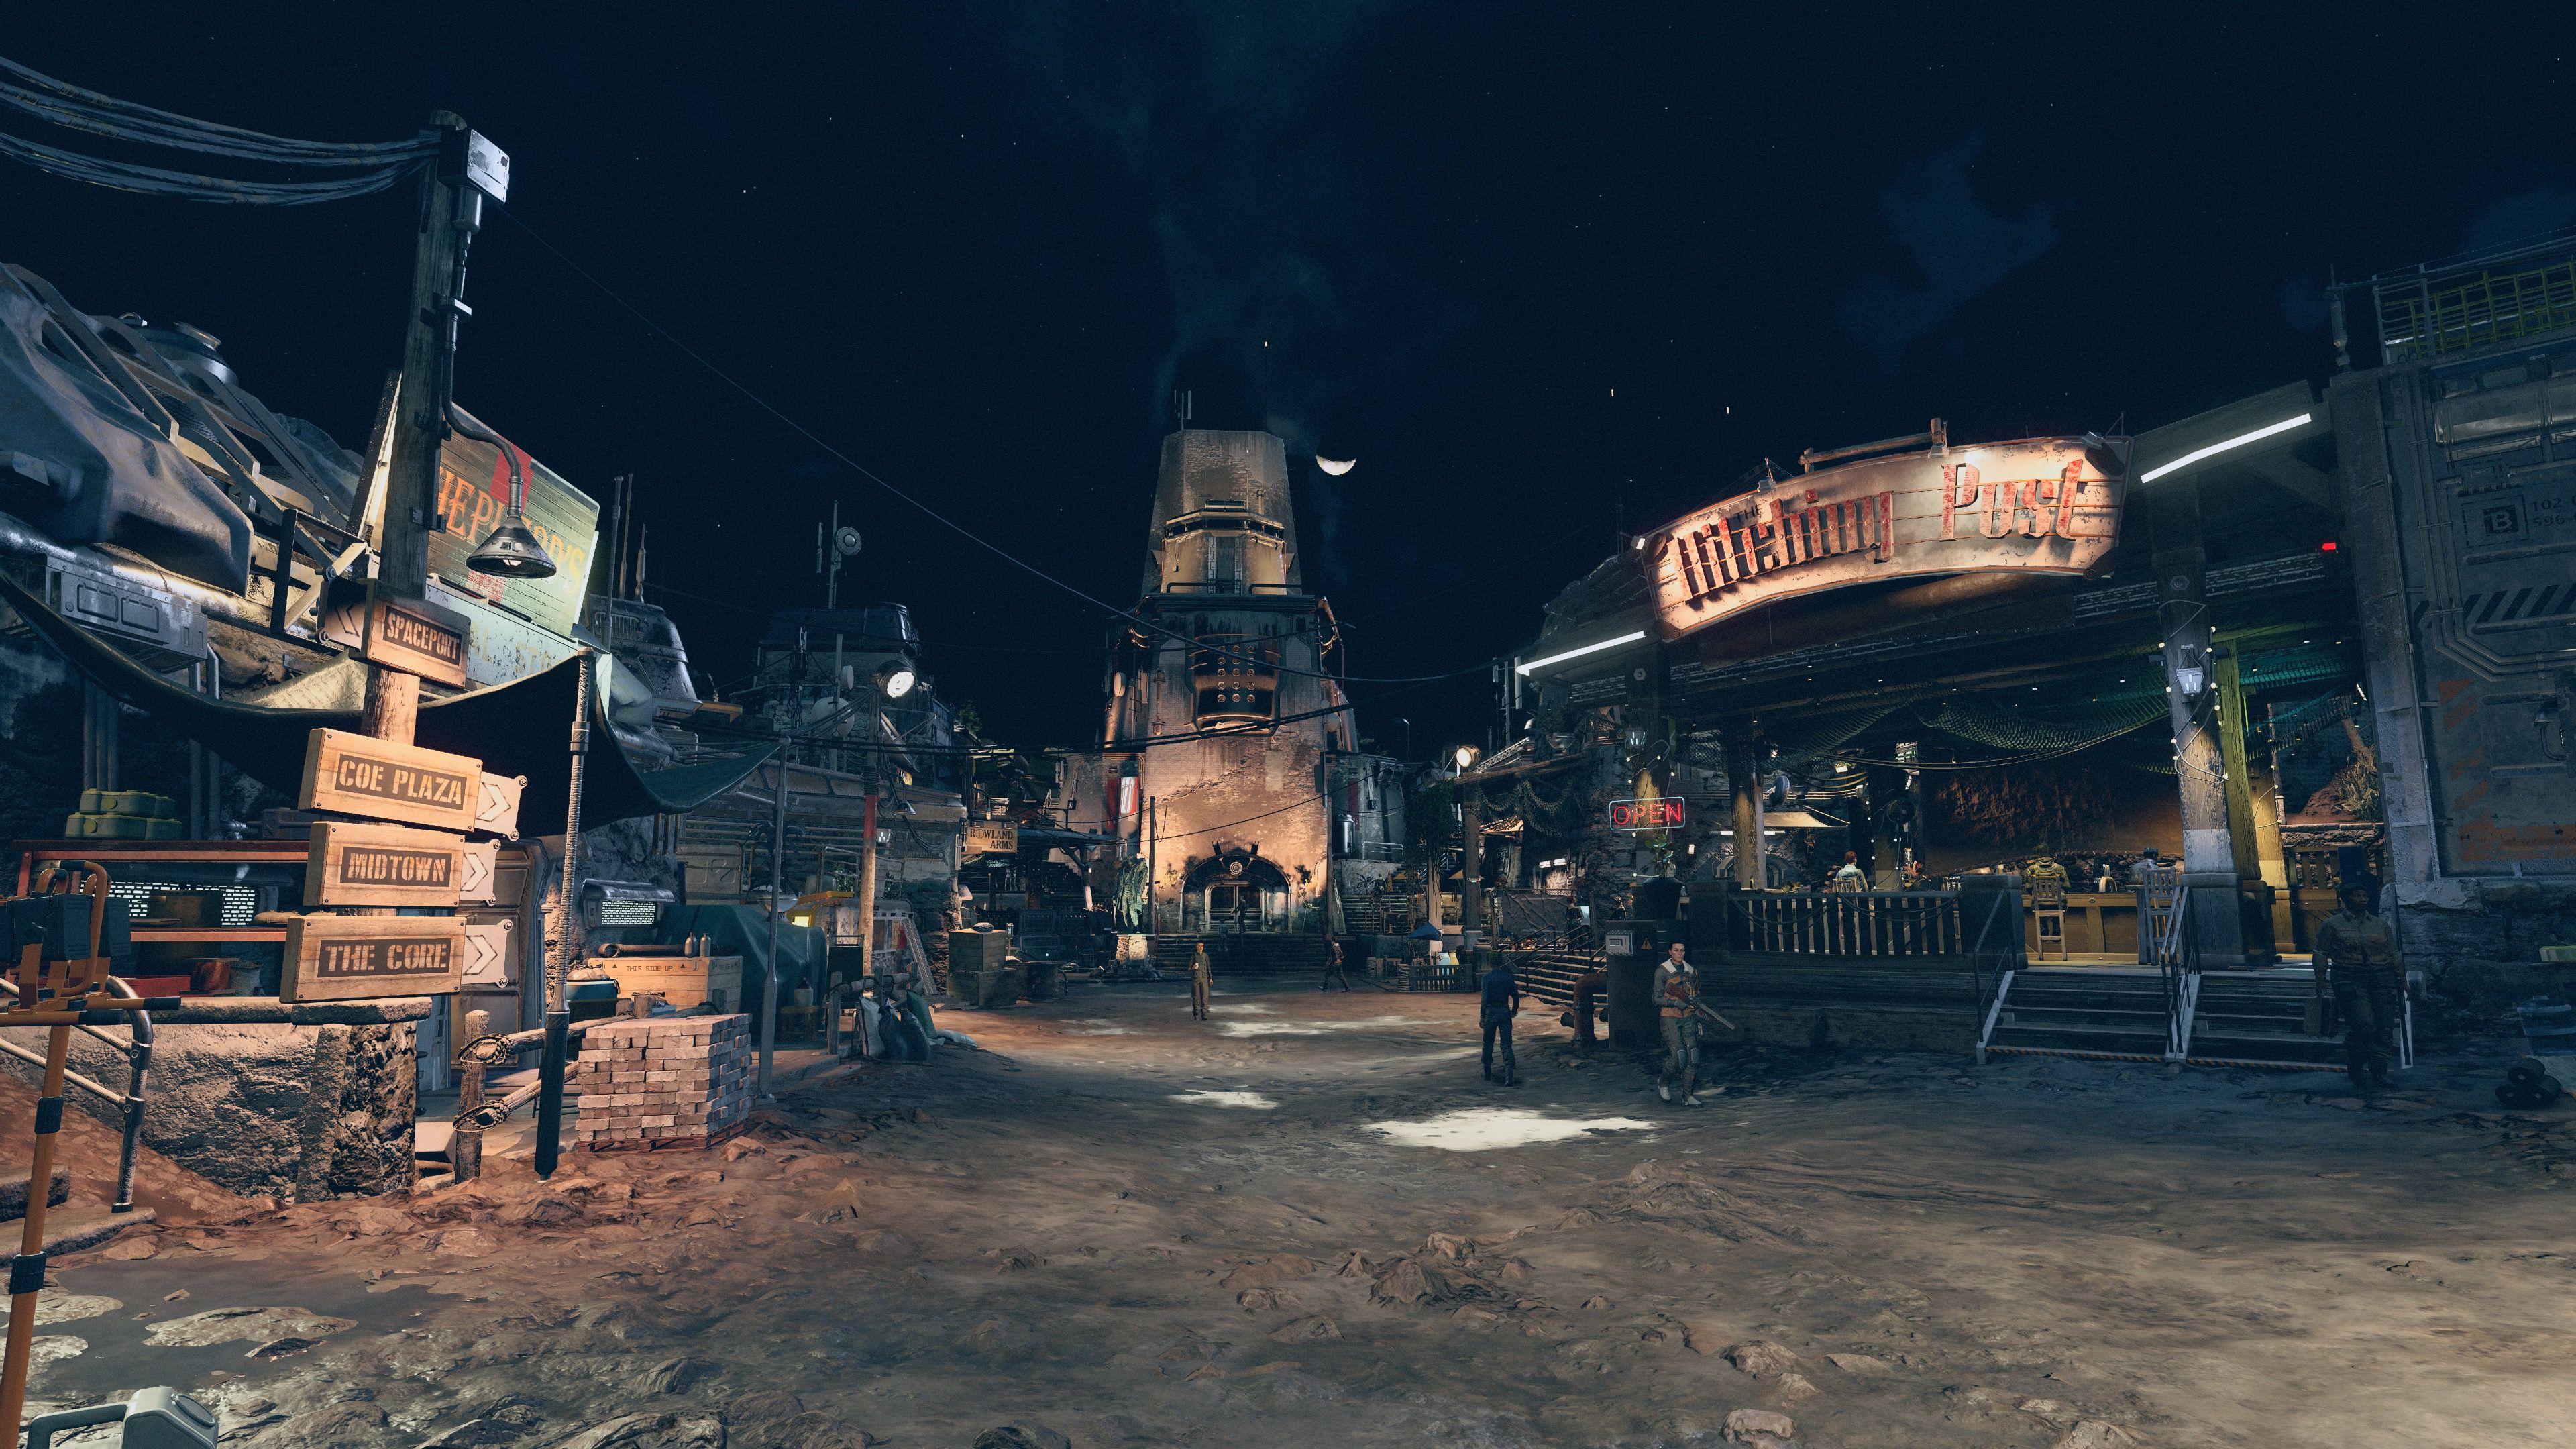 A screenshot taken from person-level at the entrance of Akila City, during the night. It's got a very wild west sort of feel to it, the ground is dirt and the buildings are cobbled together out of a combination of wood and futuristic-looking metal. It's not very well lit and the lights are quite yellow-coloured. In the centre of the frame is an imposing-looking multi-storey mostly built out of stone, with more yellow lights lighting it up from below.